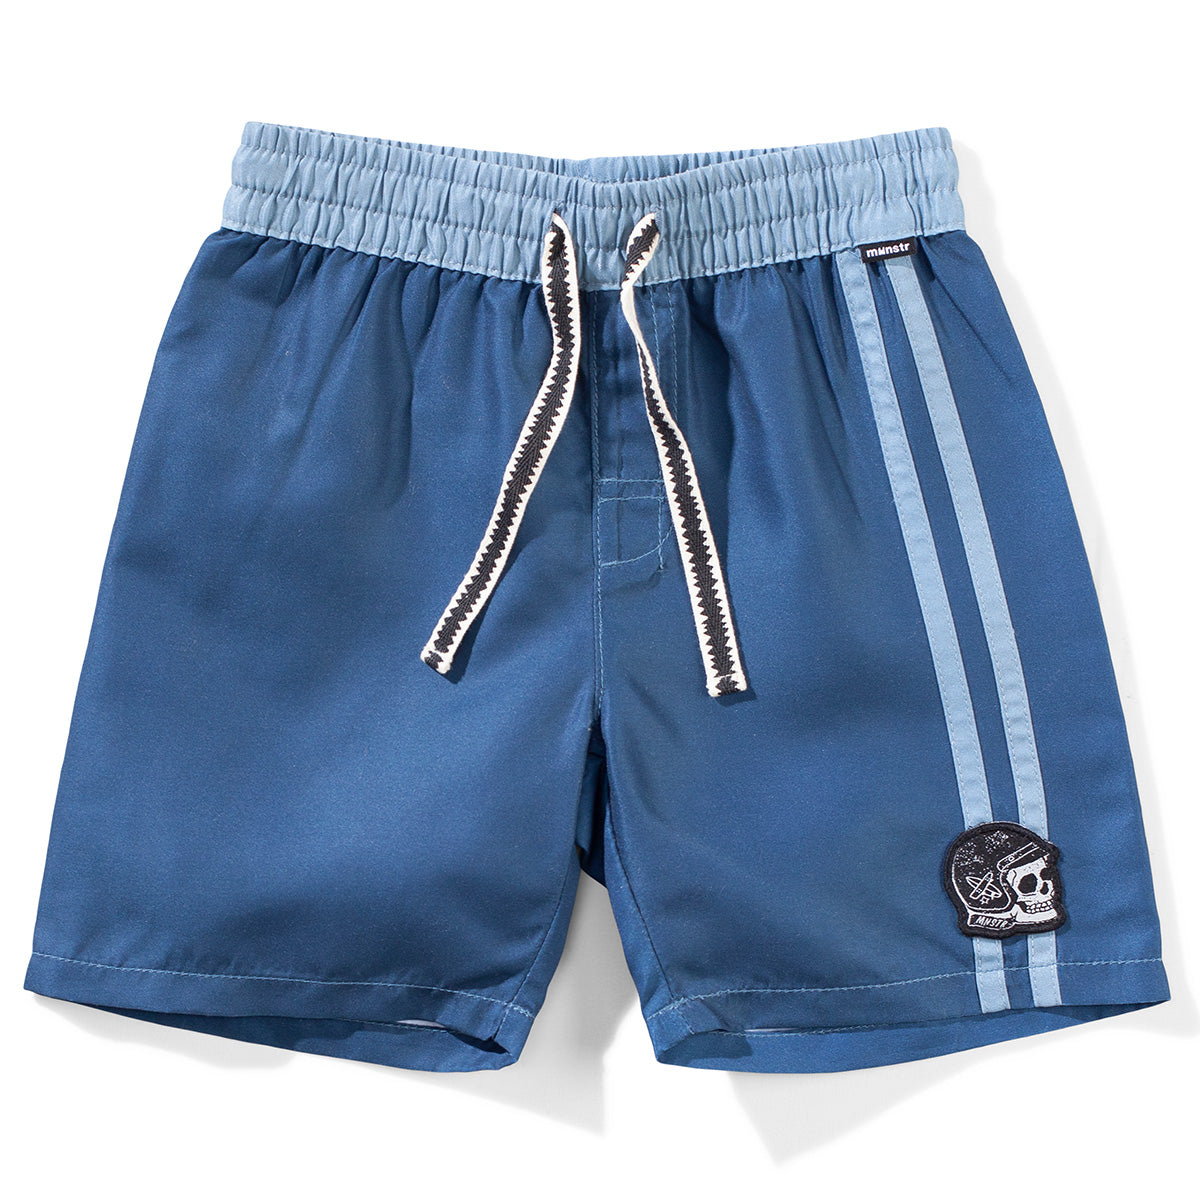 The Blaze Short from Munster. Embroidered patch in the front, Back patch pocket(s), Elasticated waist.